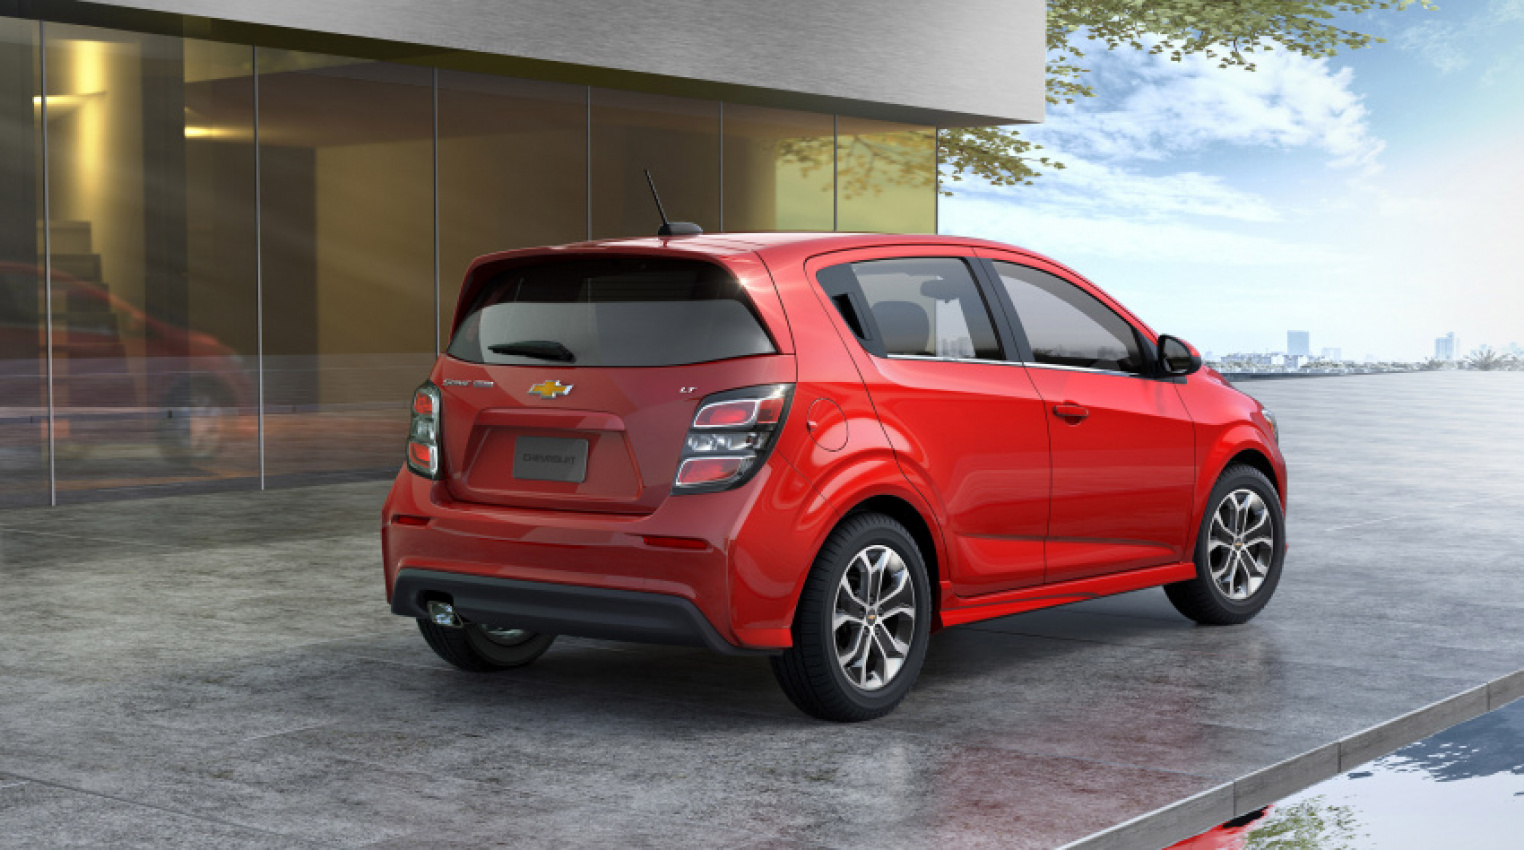 autos, cars, chevrolet, android, android, 2017 chevrolet sonic : refinement and flexibility in a single vehicle